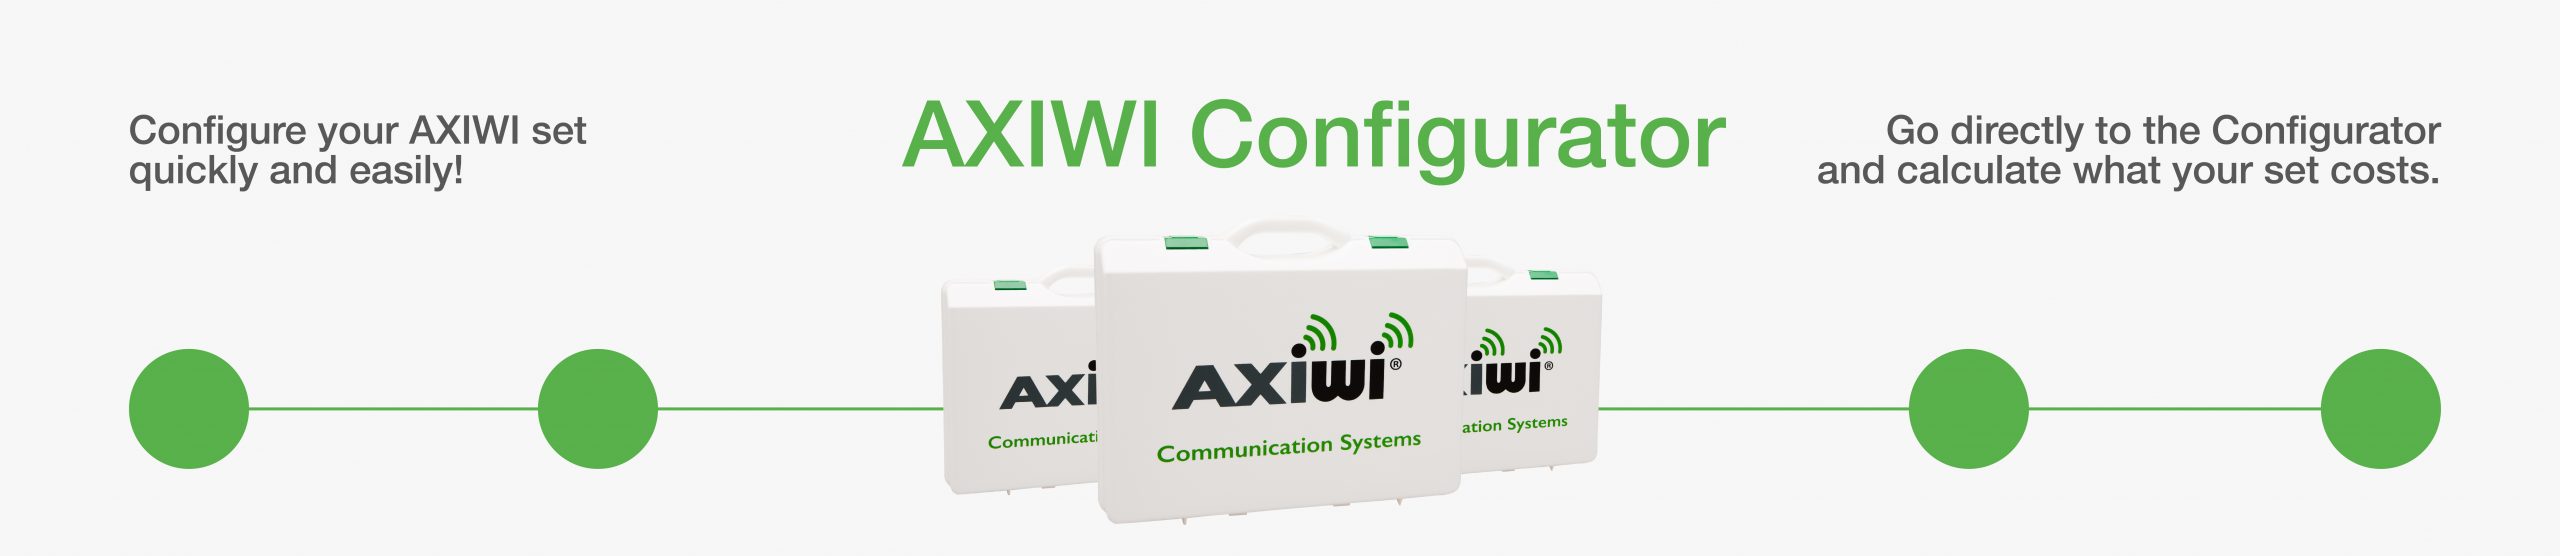 welcome at the axiwi configurator